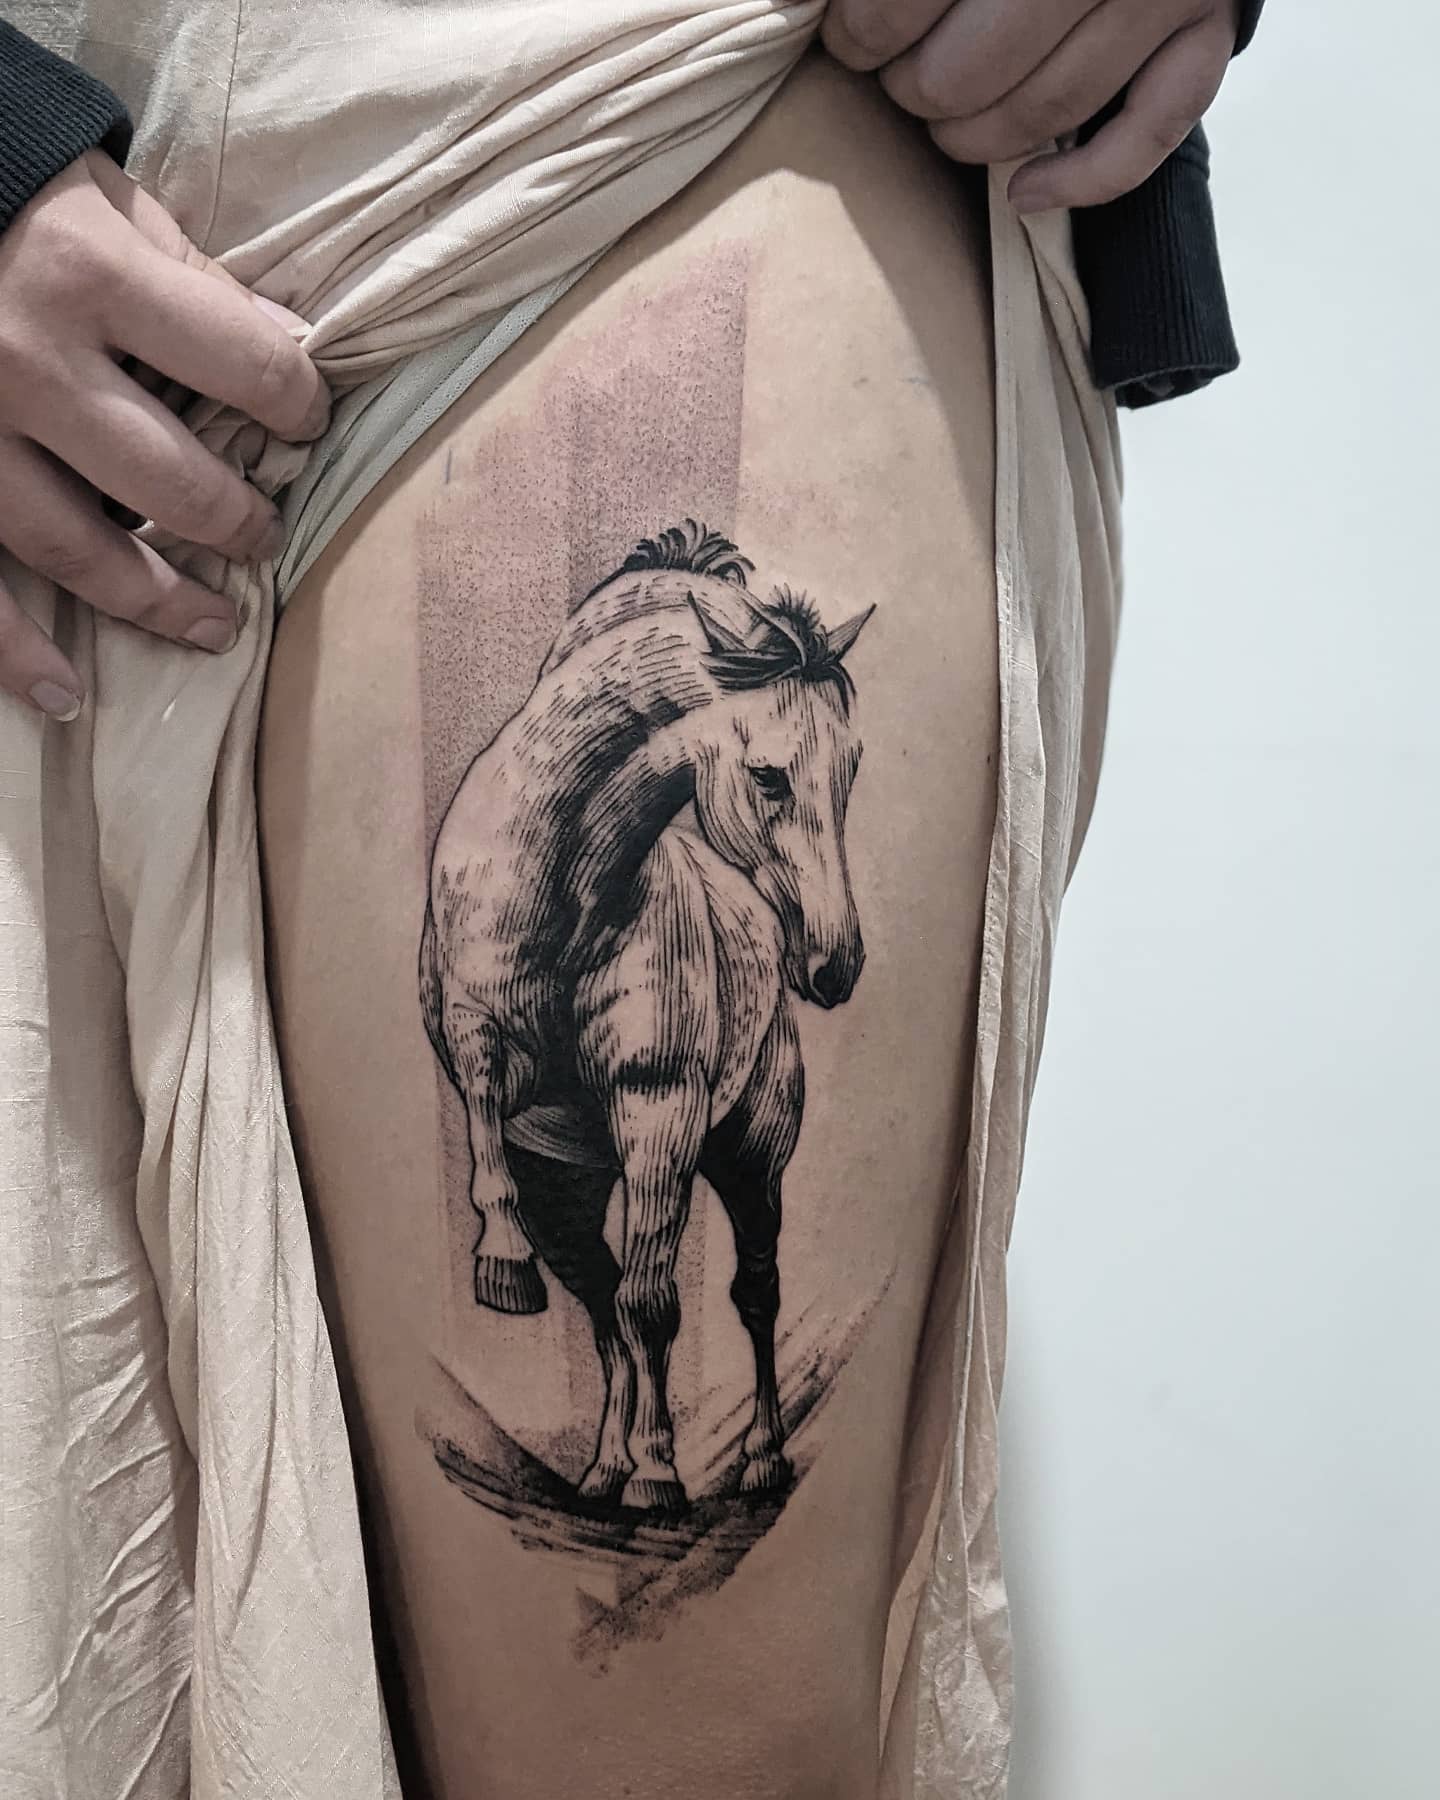 Stunning Tattoos For Horse Lovers - COWGIRL Magazine